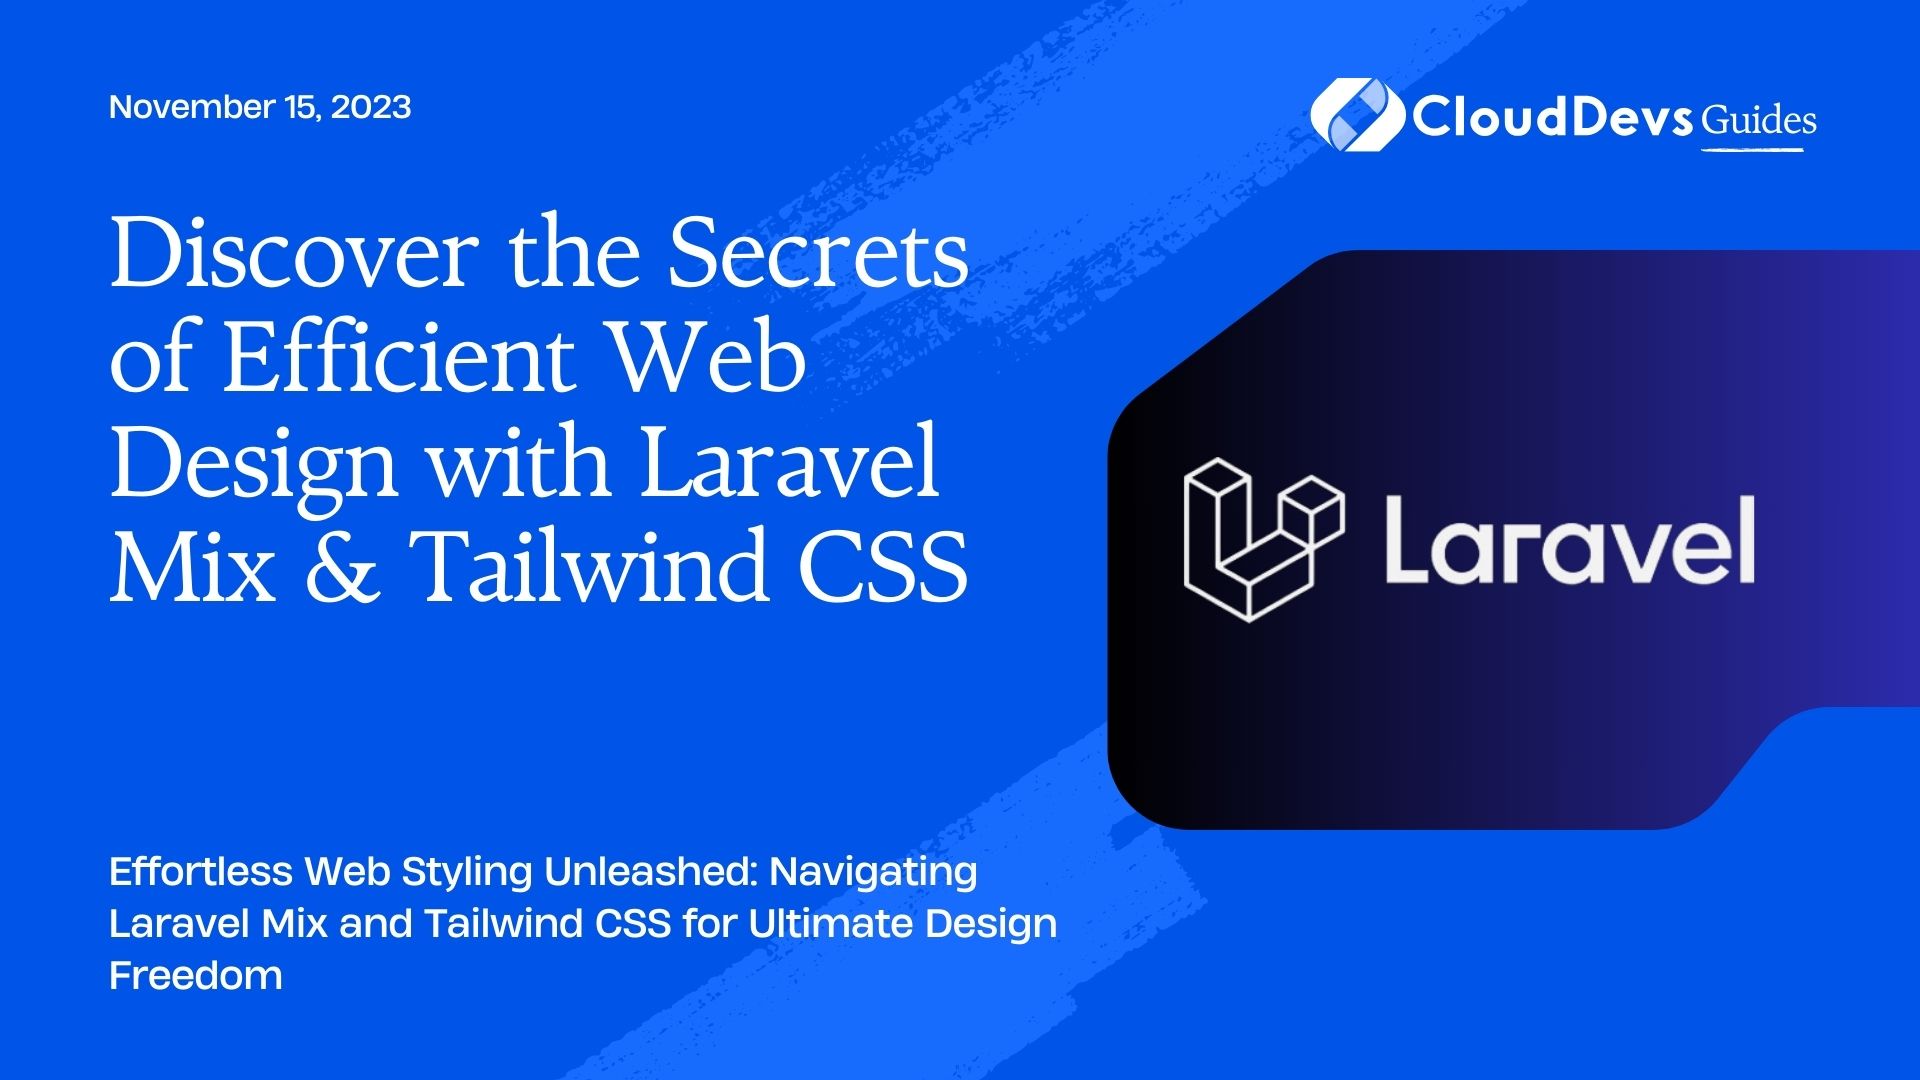 Discover the Secrets of Efficient Web Design with Laravel Mix & Tailwind CSS